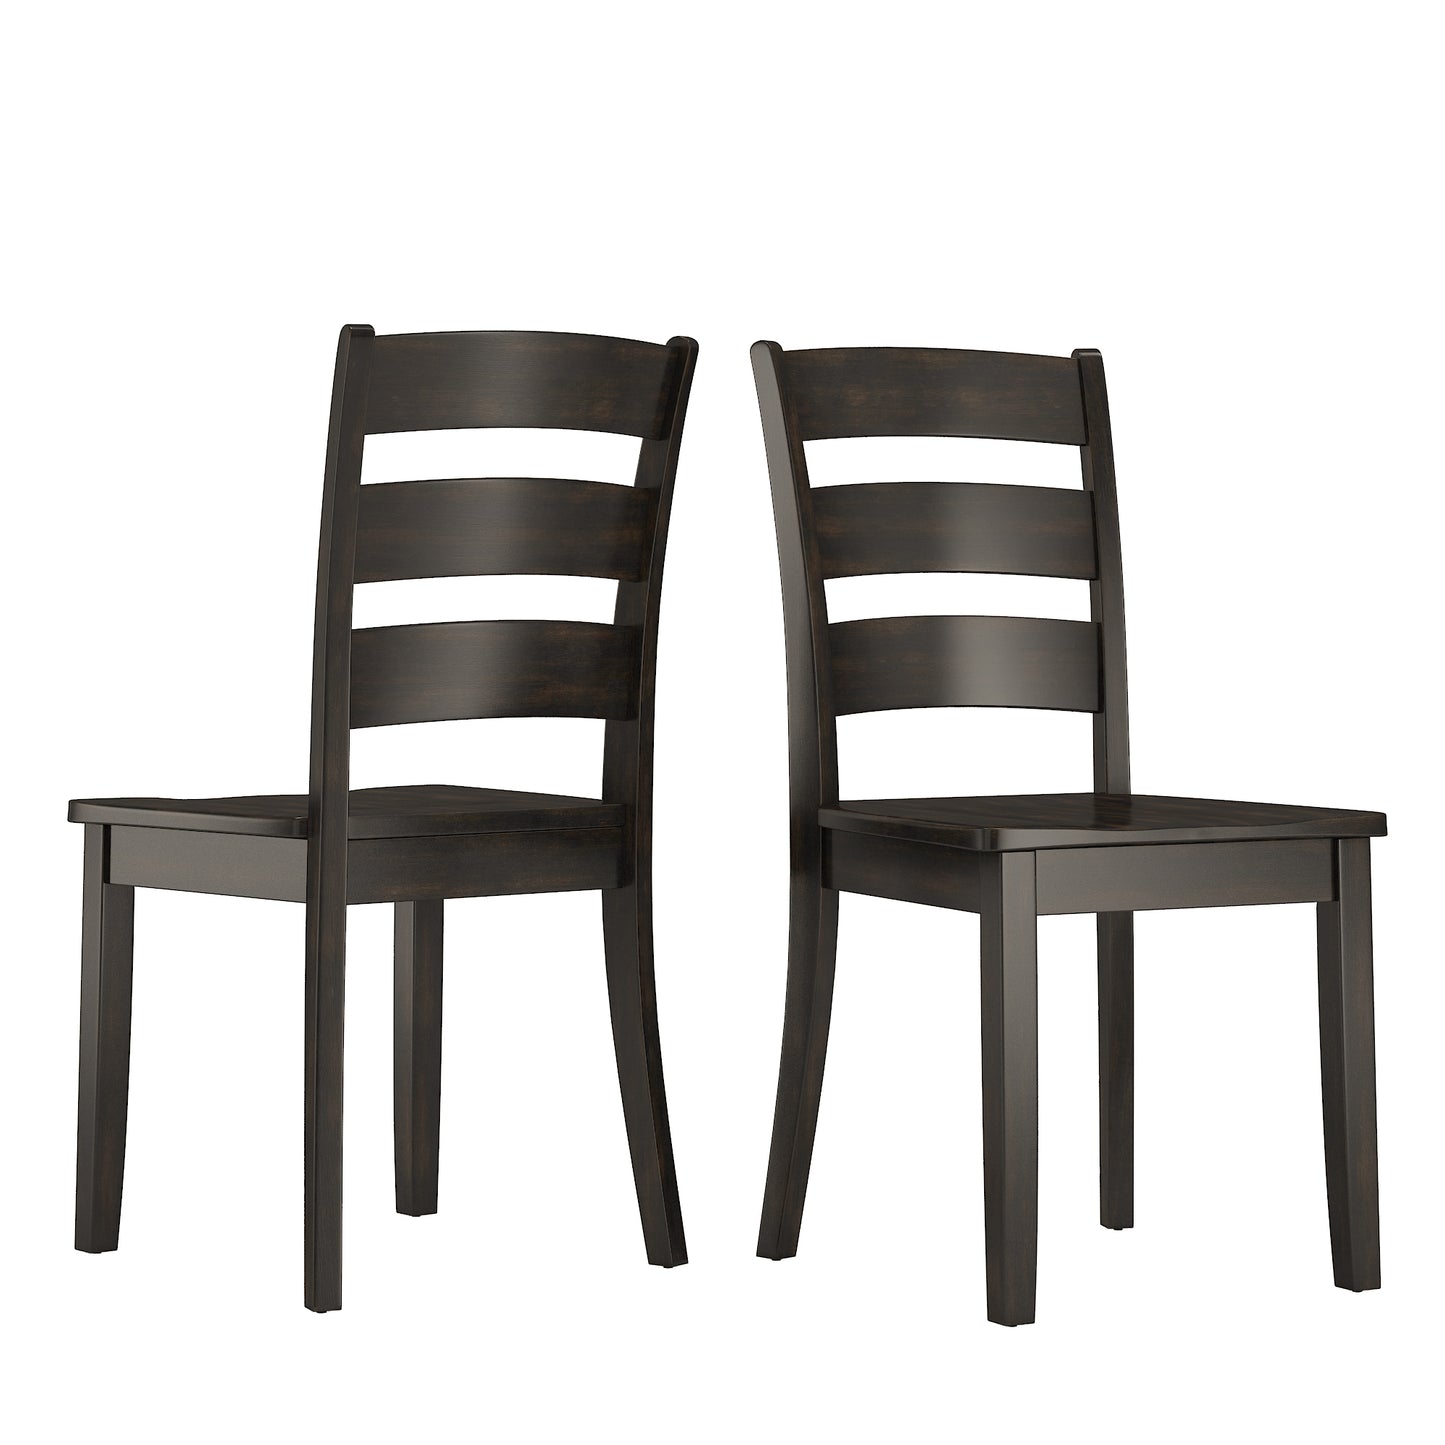 Ladder Back Wood Dining Chairs (Set of 2) - Antique Black Finish